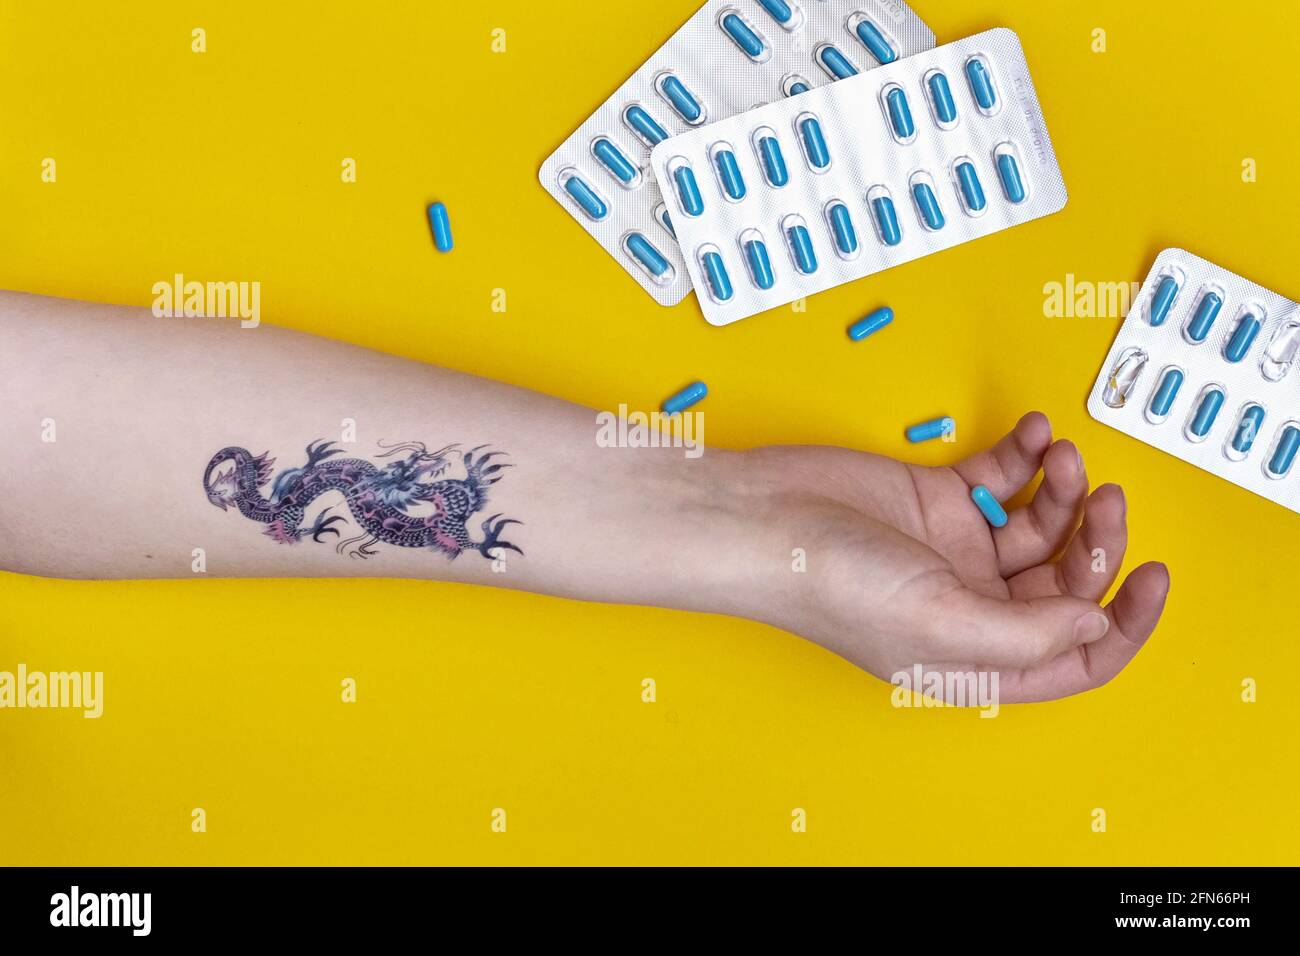 Female hand with a tattoo on a yellow background with scattered sleeping pills. Insomnia, depression, suicide concept. Stock Photo